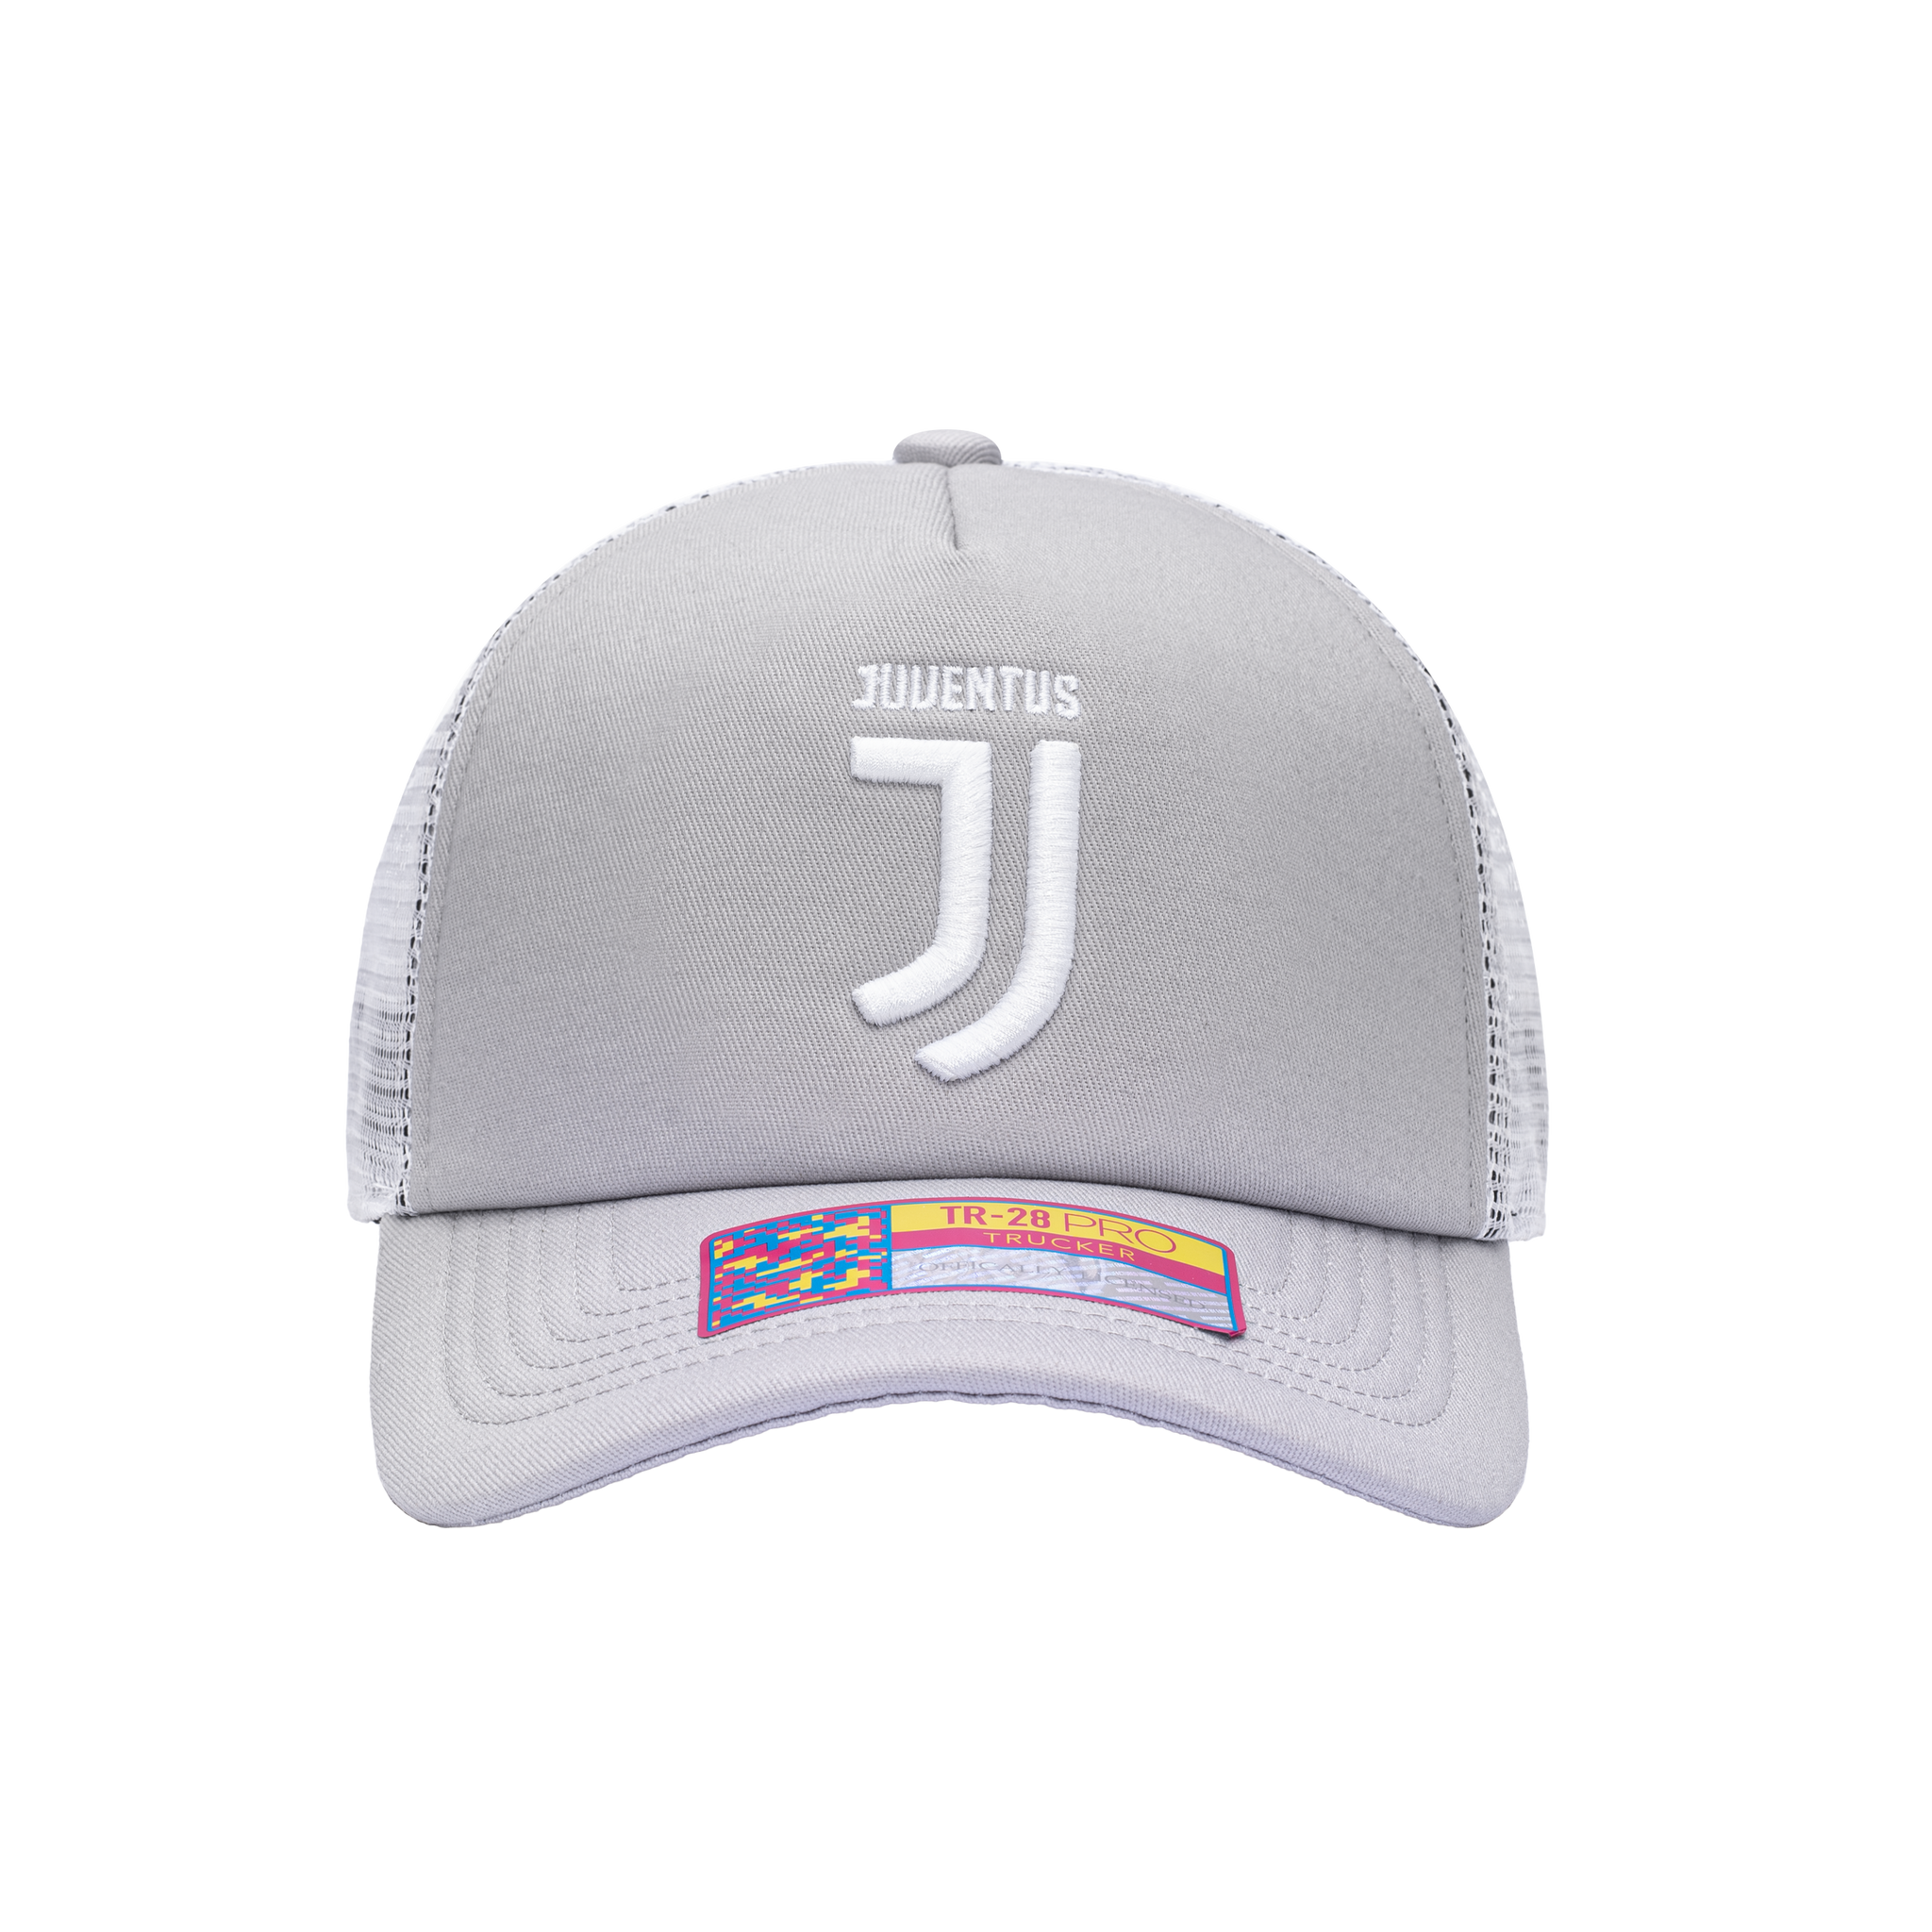 Front view of the Juventus Fog Trucker Hat in Grey/White, with a high crown, curved peak, mesh back and snapback closure.